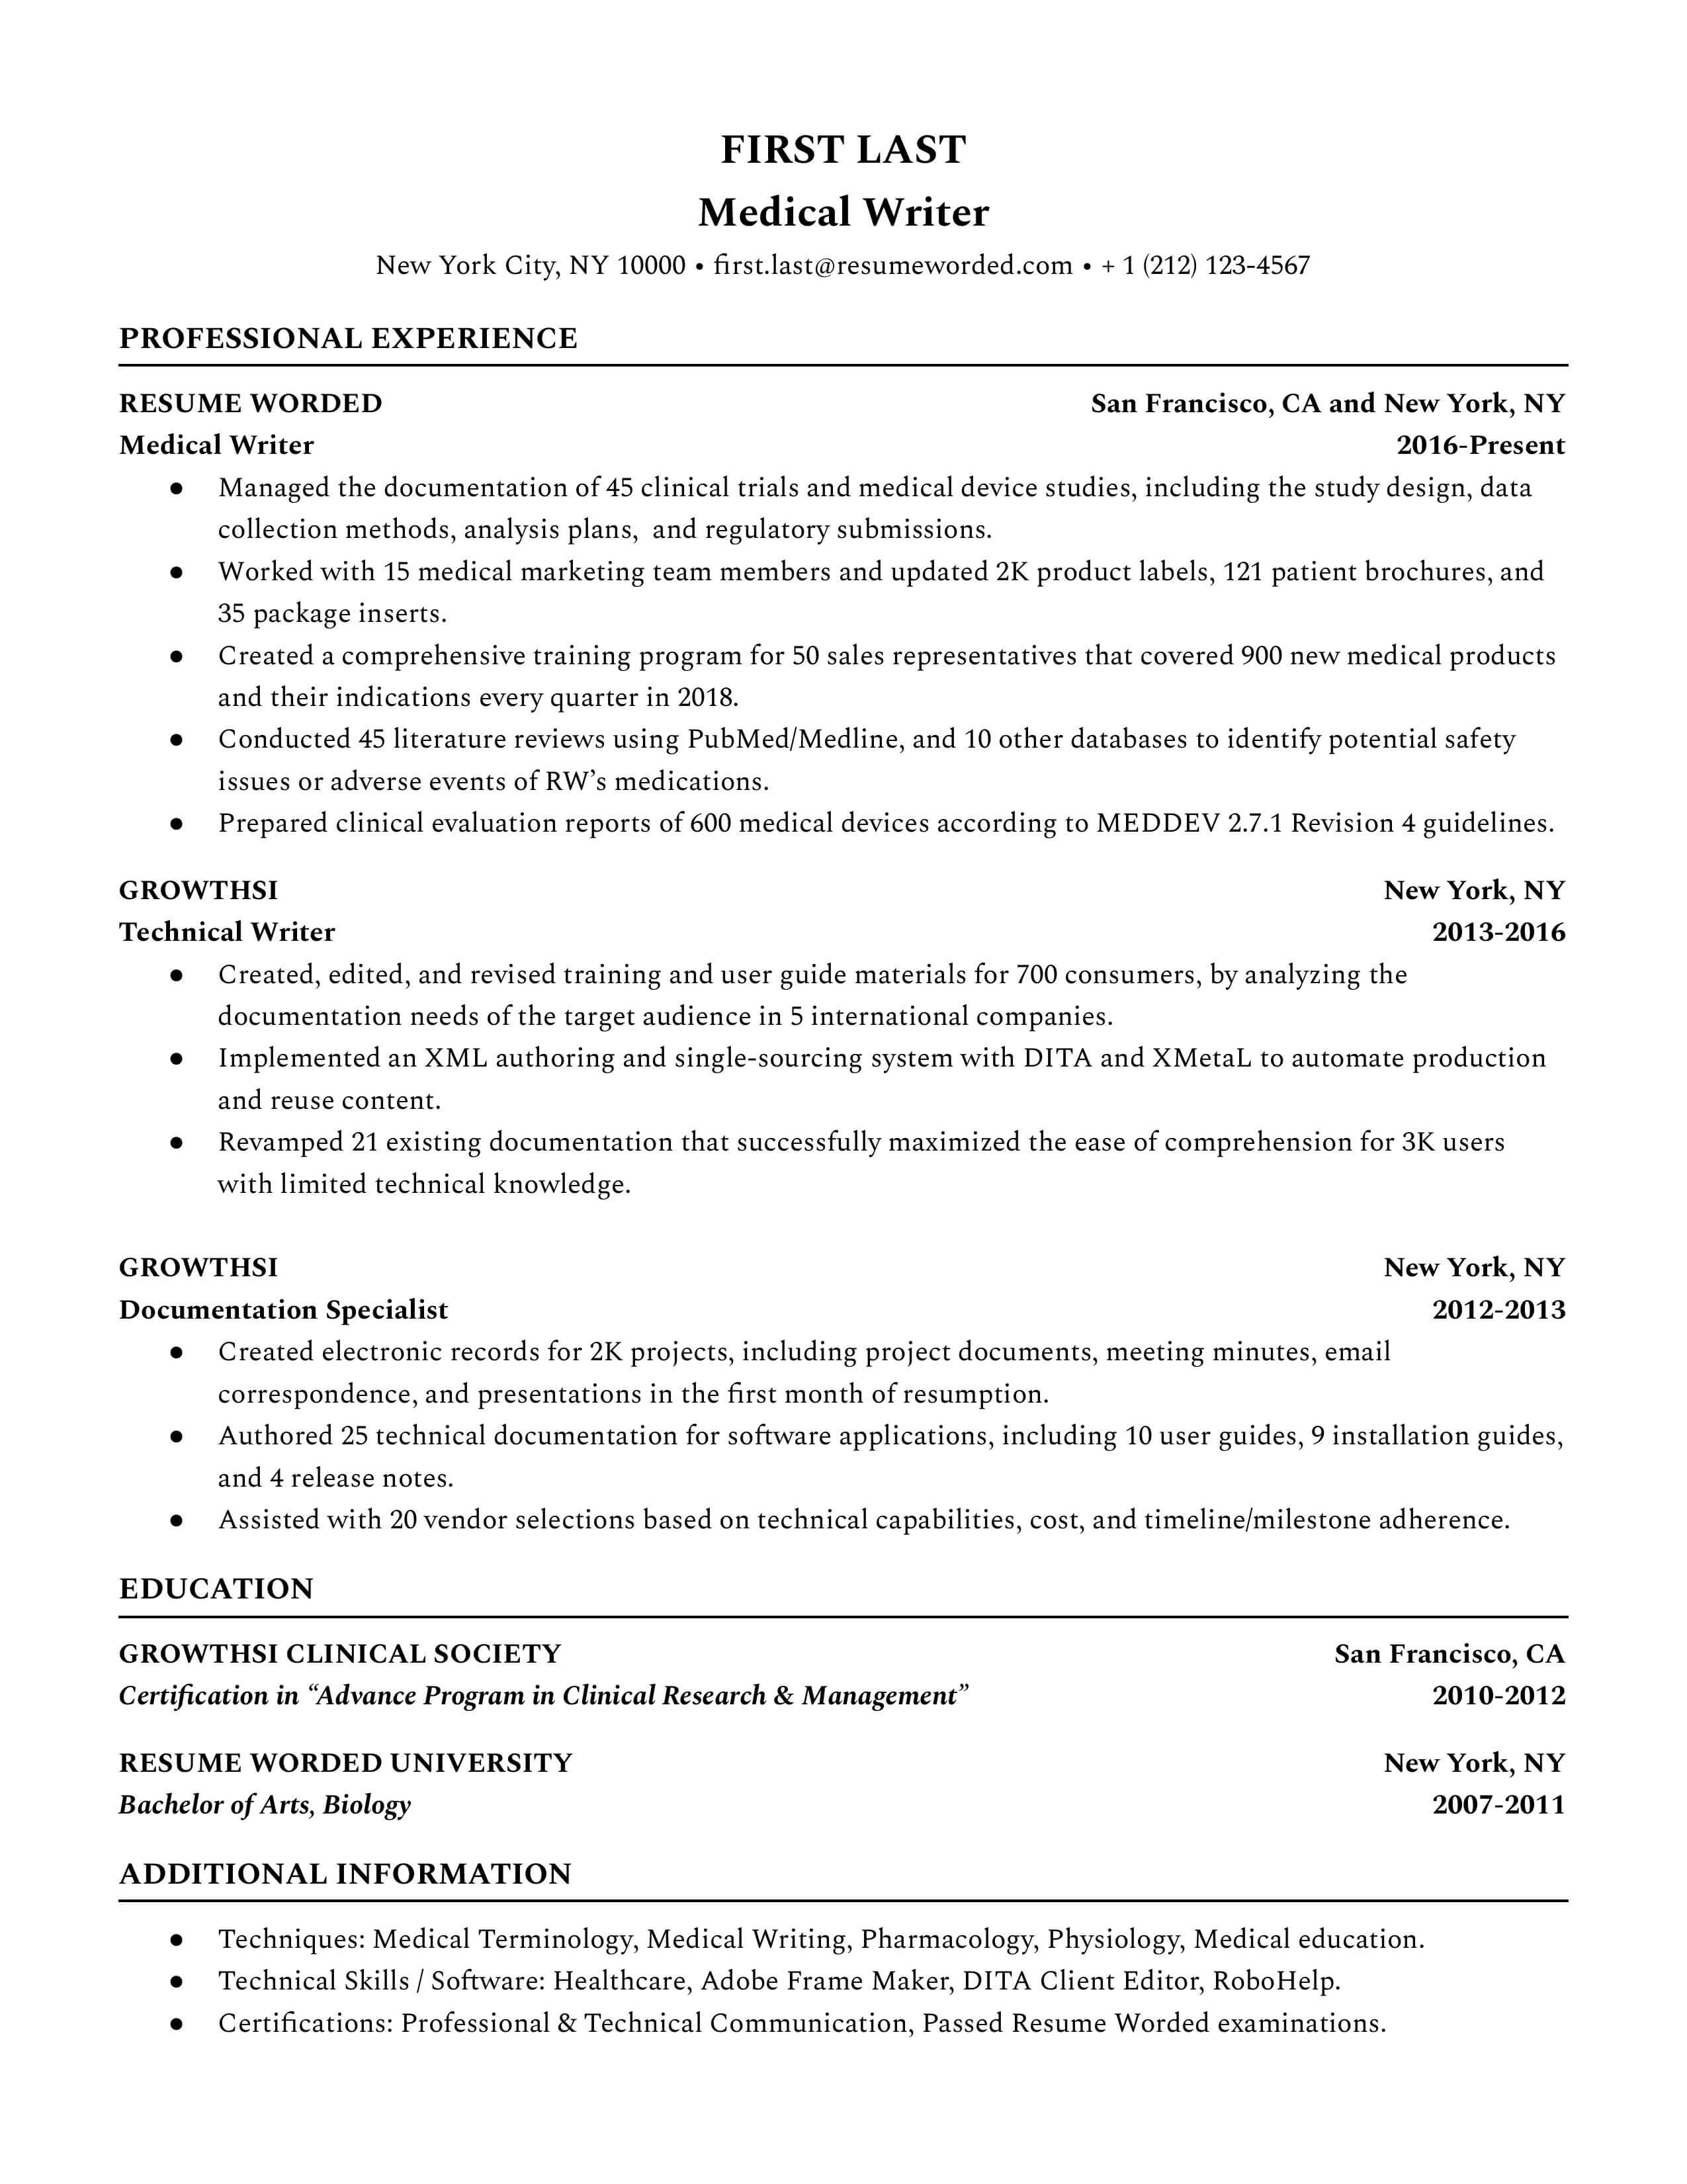 A medical writer resume sample that highlights the applicant’s industry knowledge and experience.